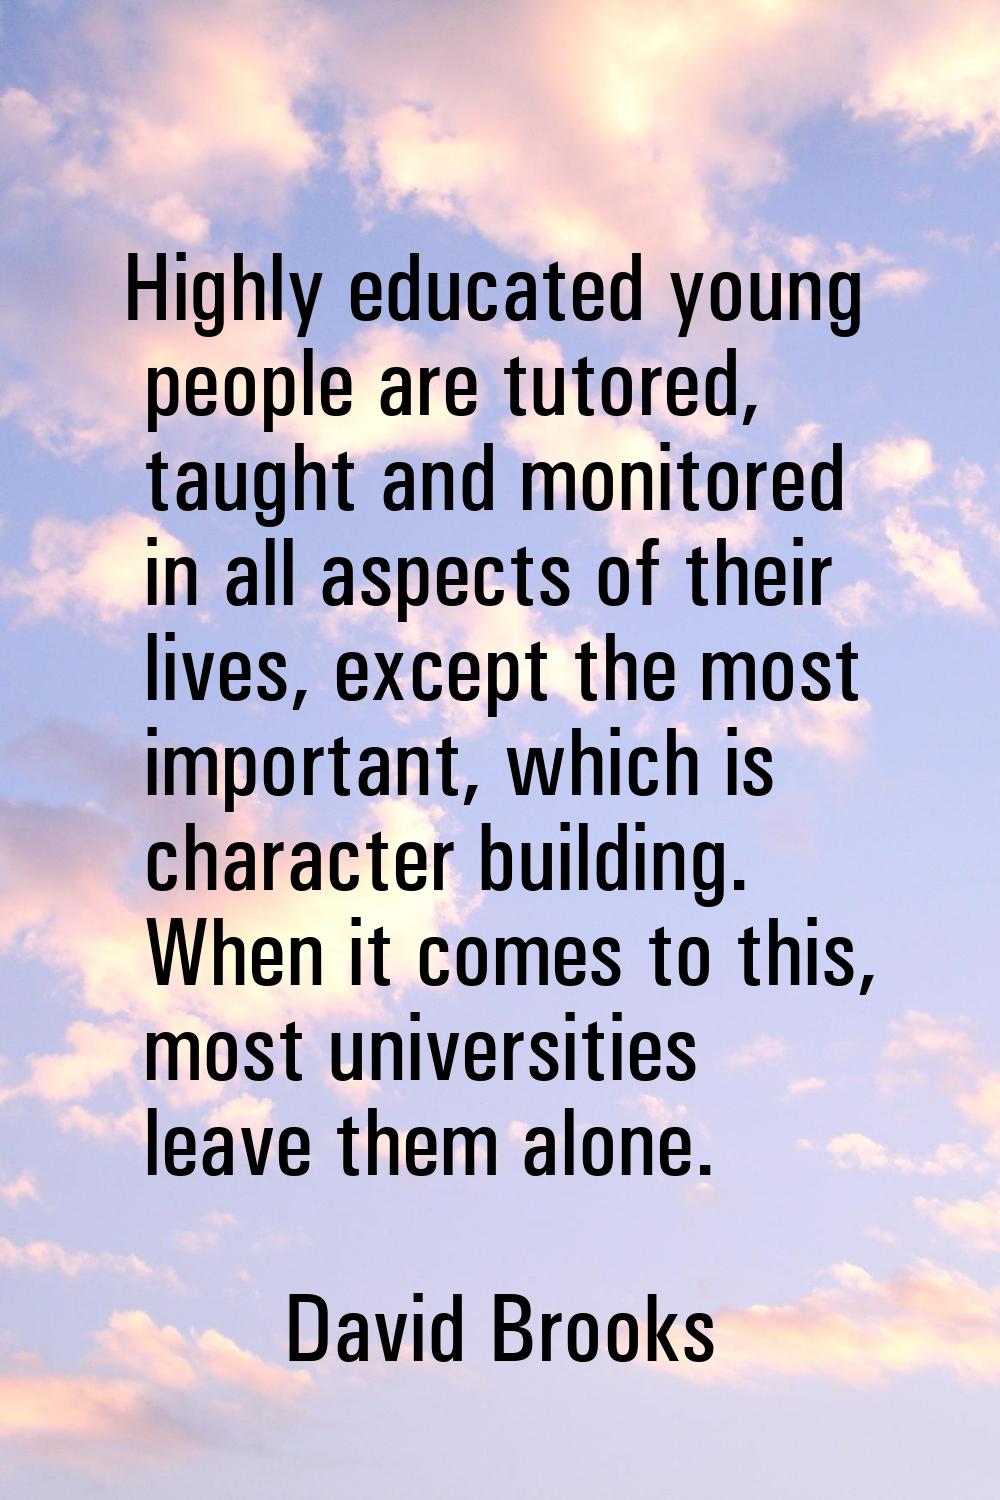 Highly educated young people are tutored, taught and monitored in all aspects of their lives, excep